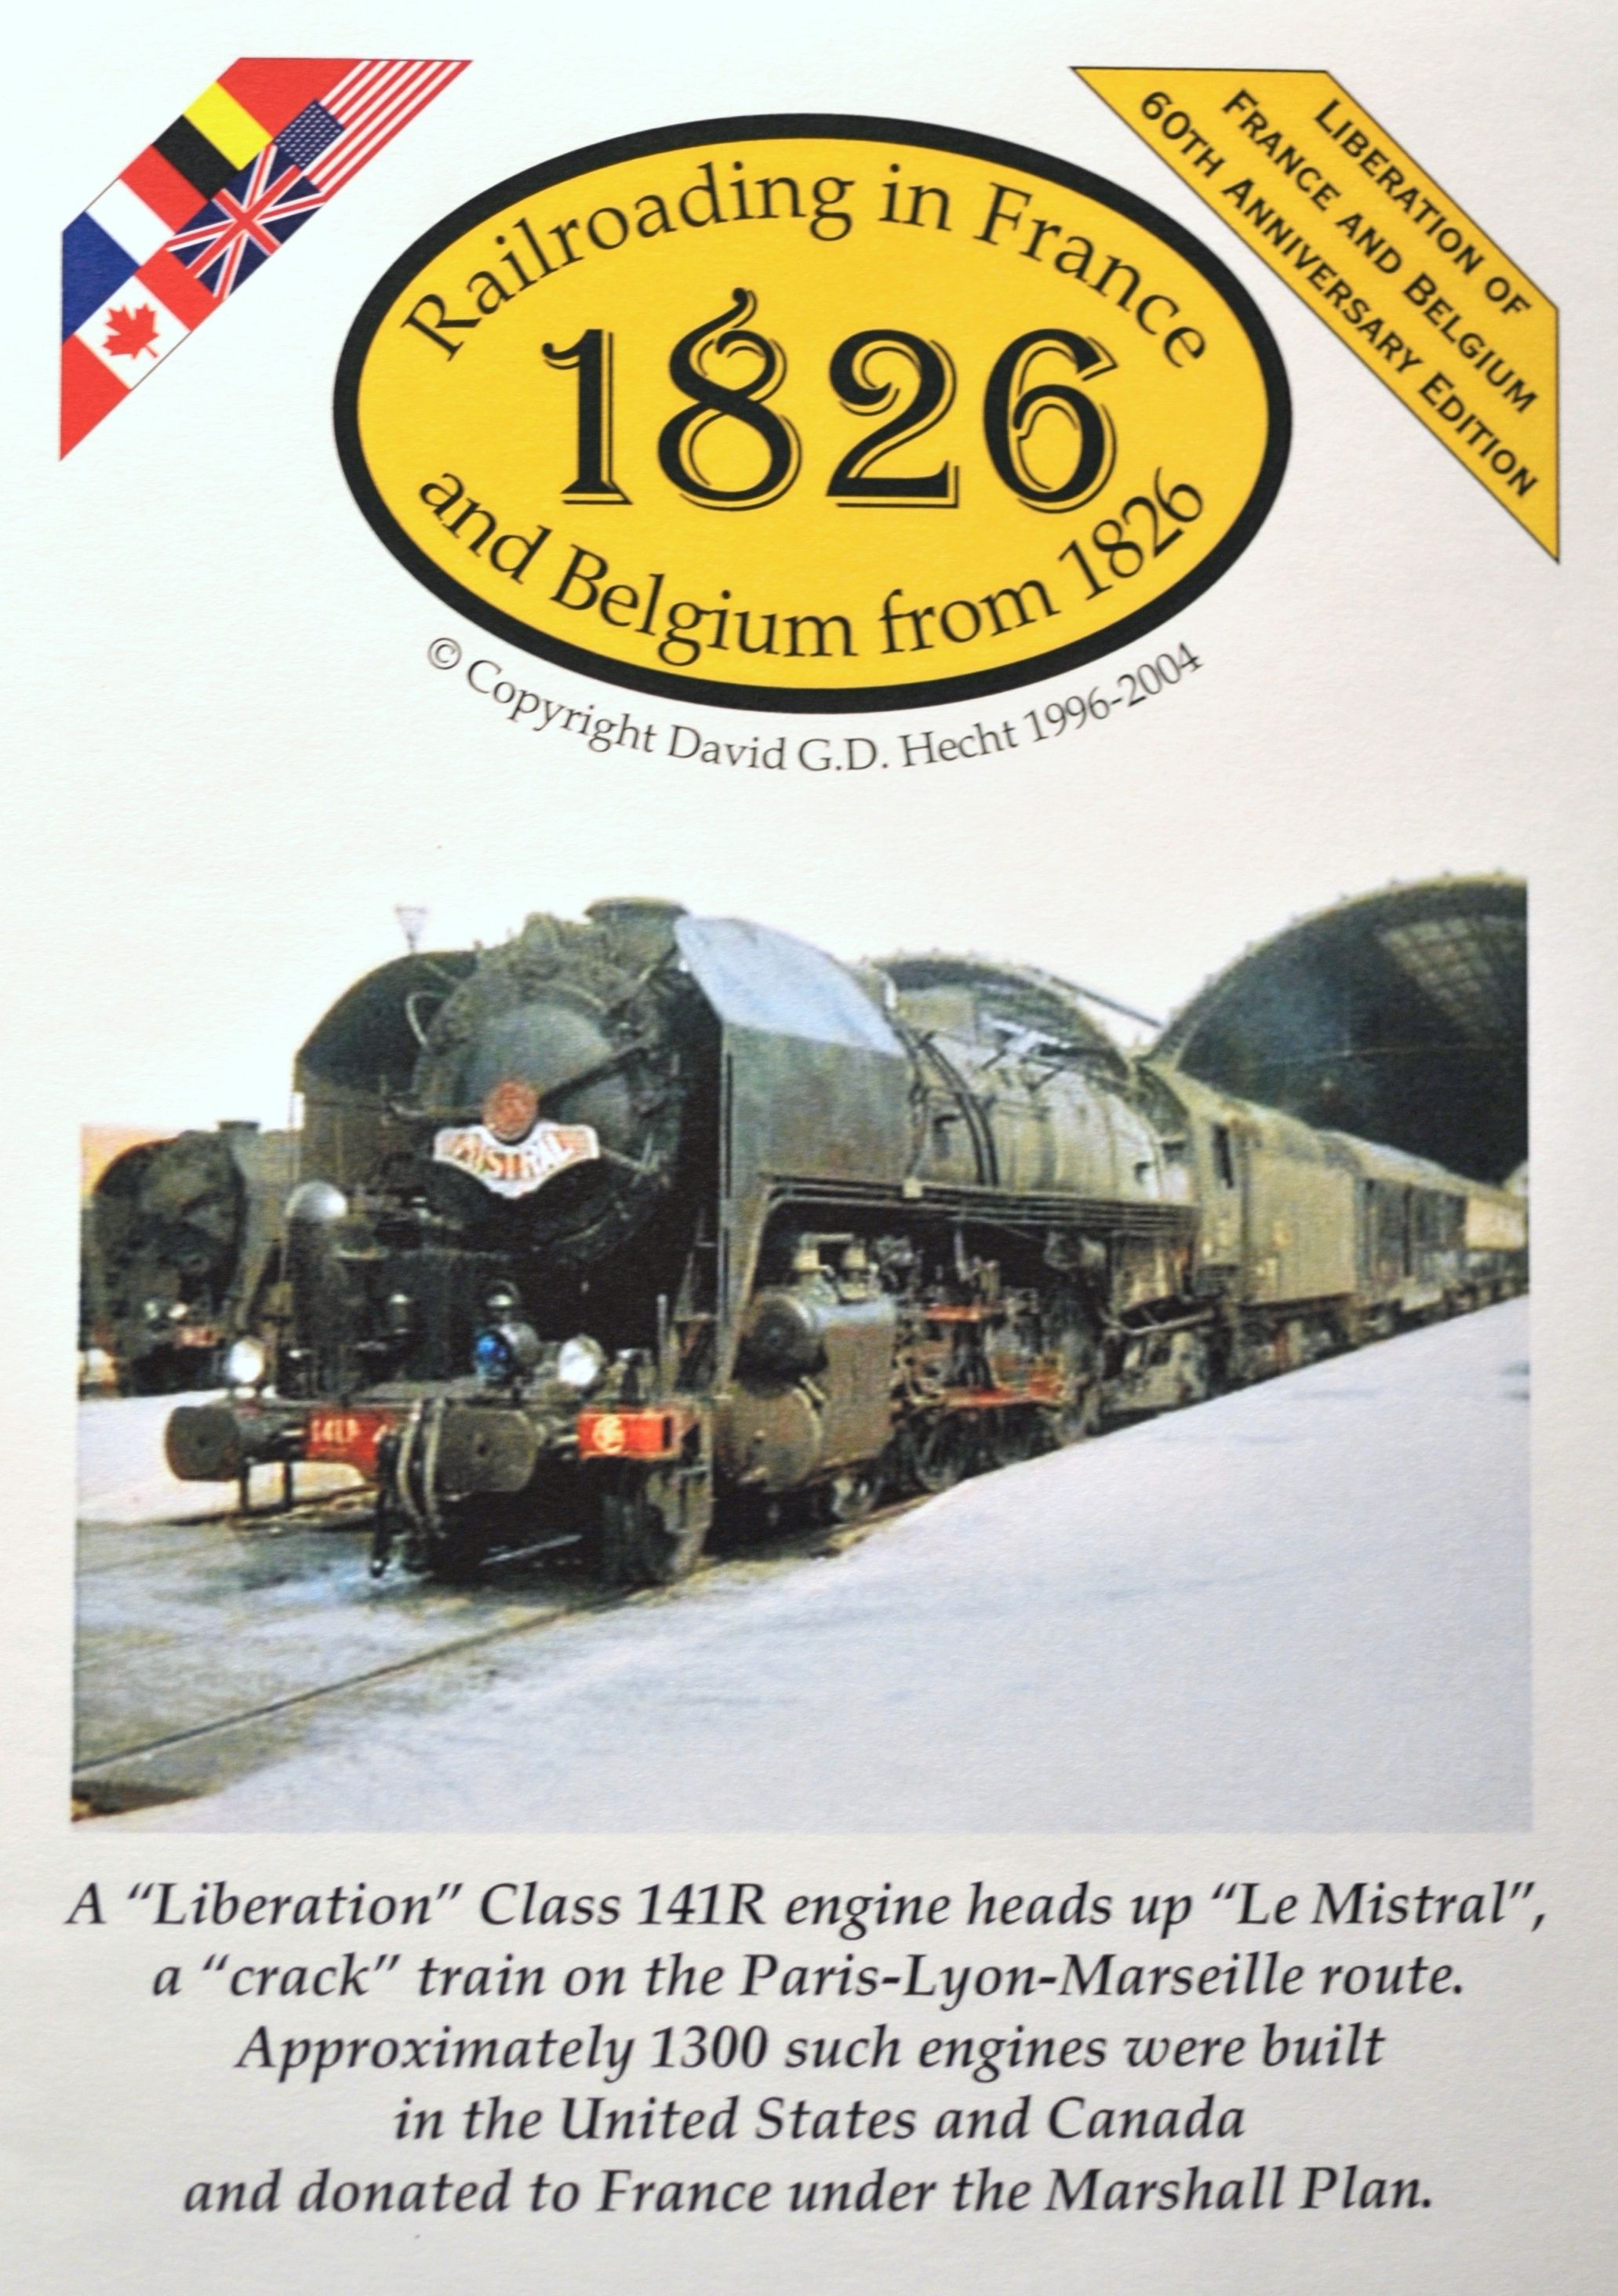 1826: Railroading in France and Belgium from 1826